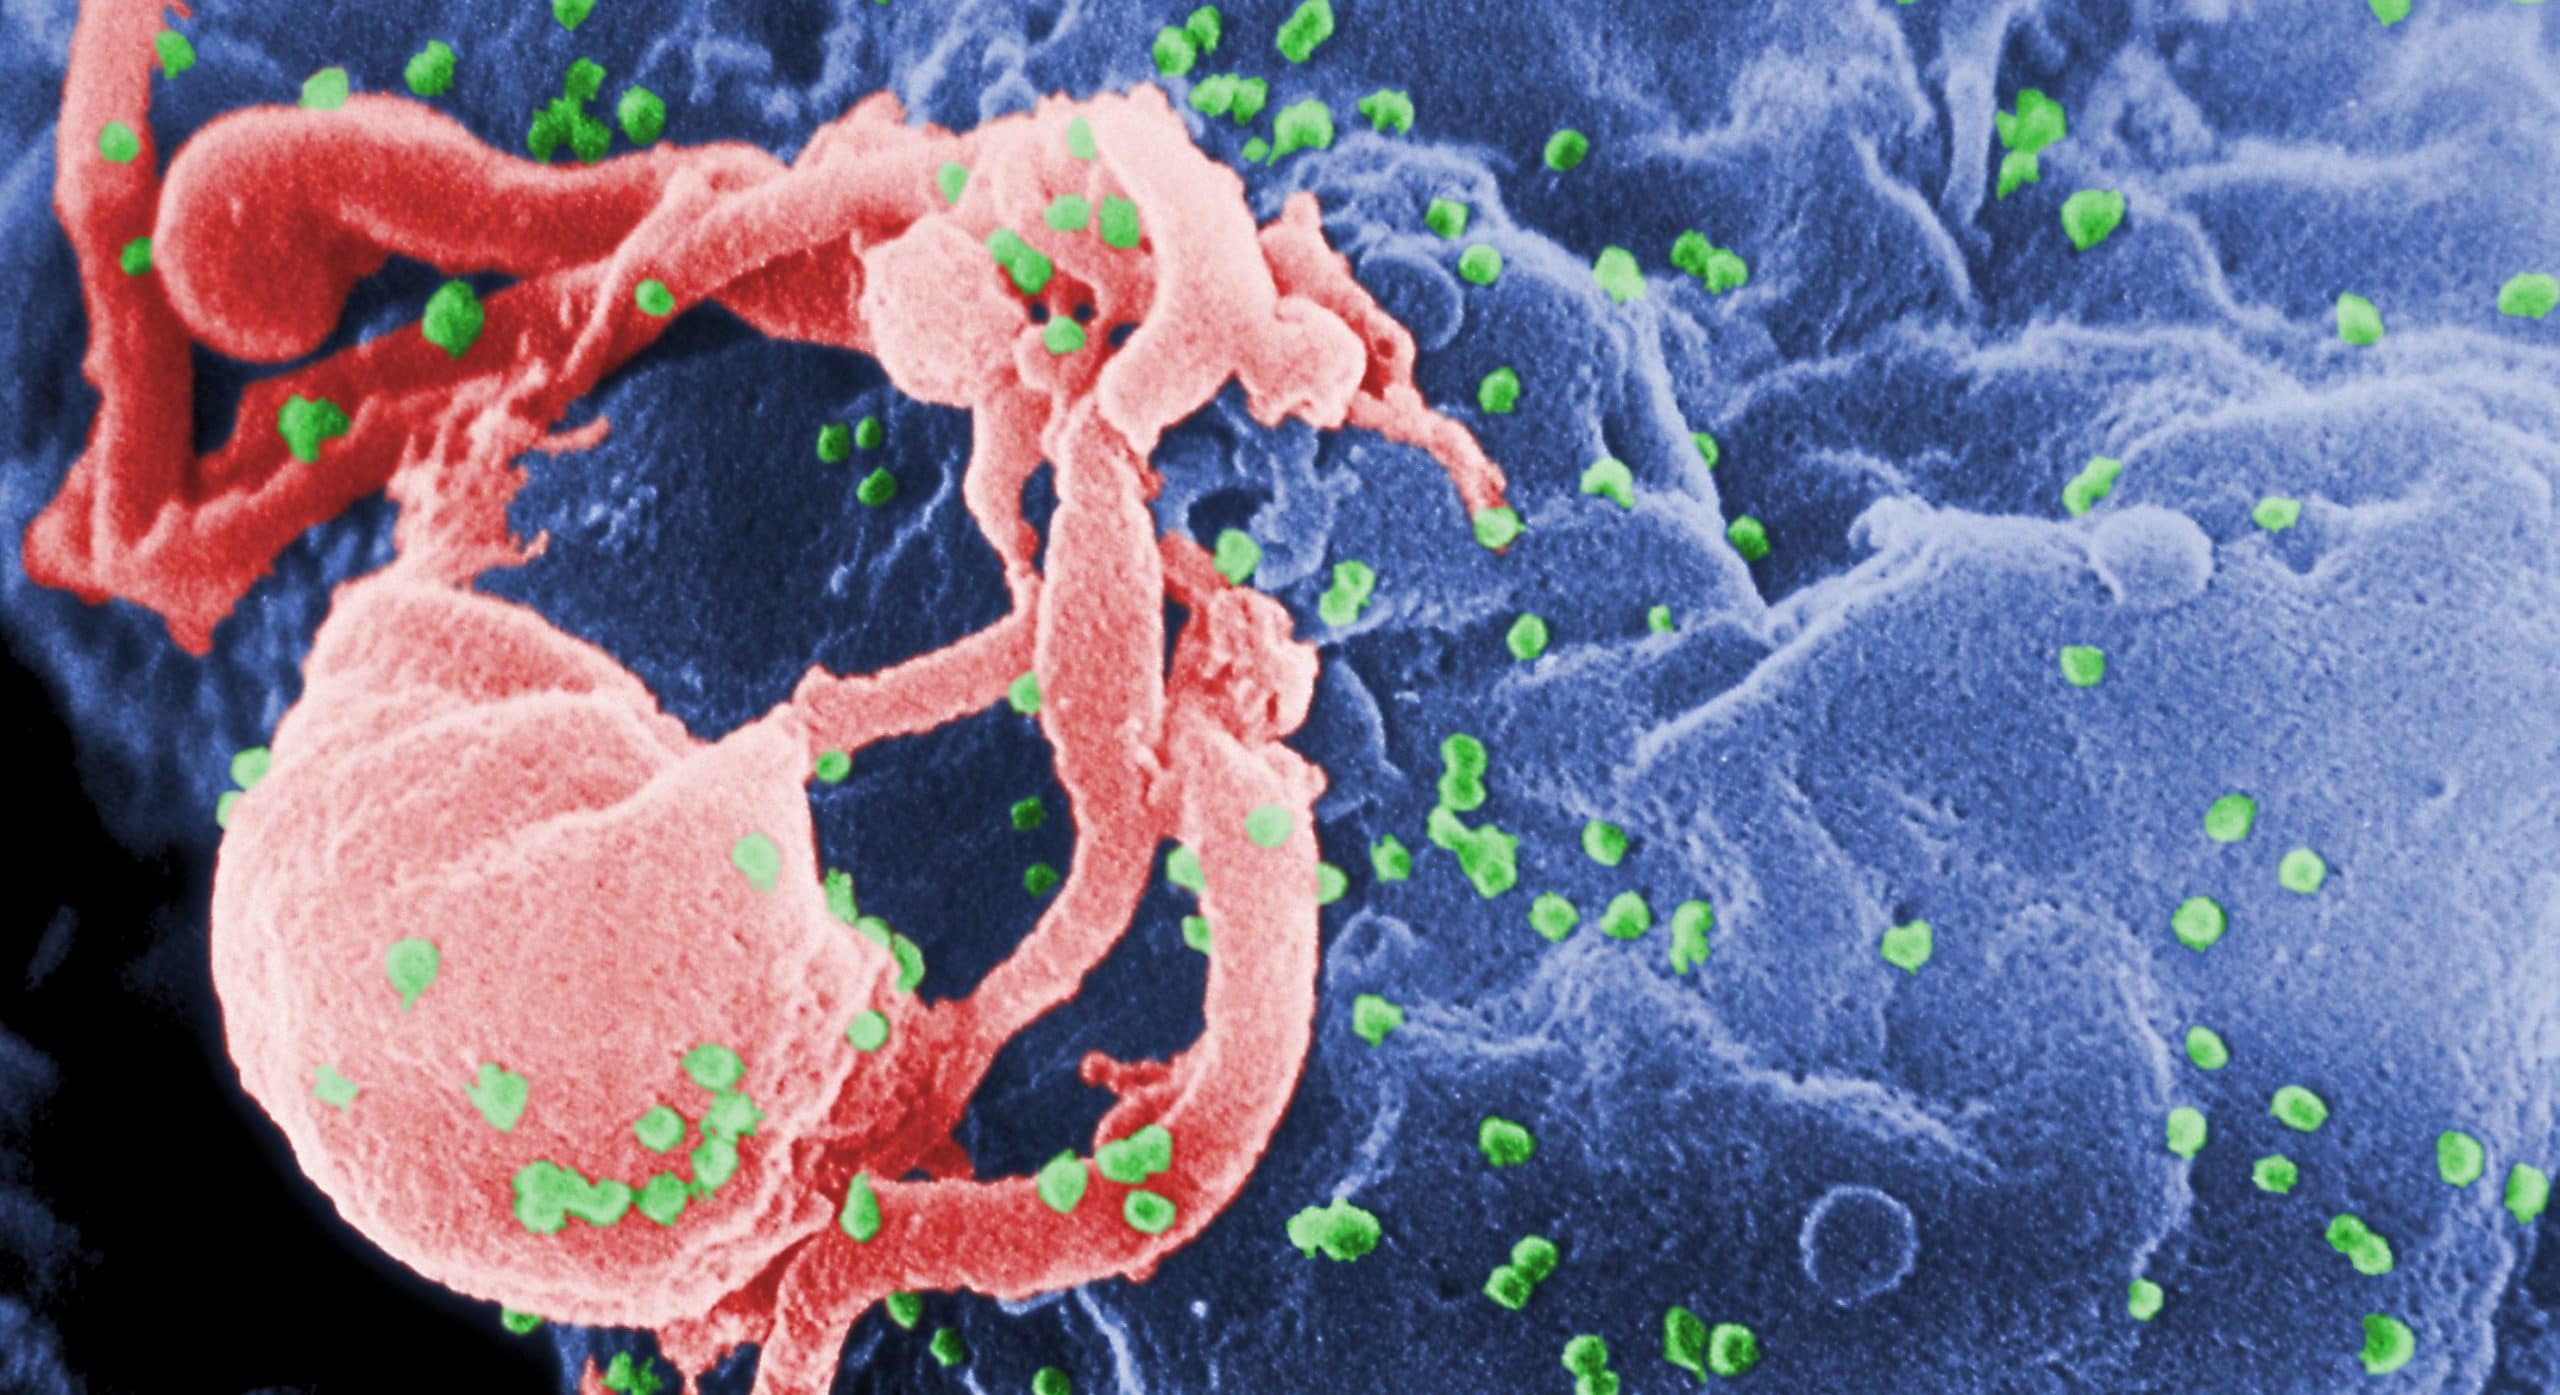 Scanning electron micrograph of HIV-1; homosexuality is not a healthy lifestyle